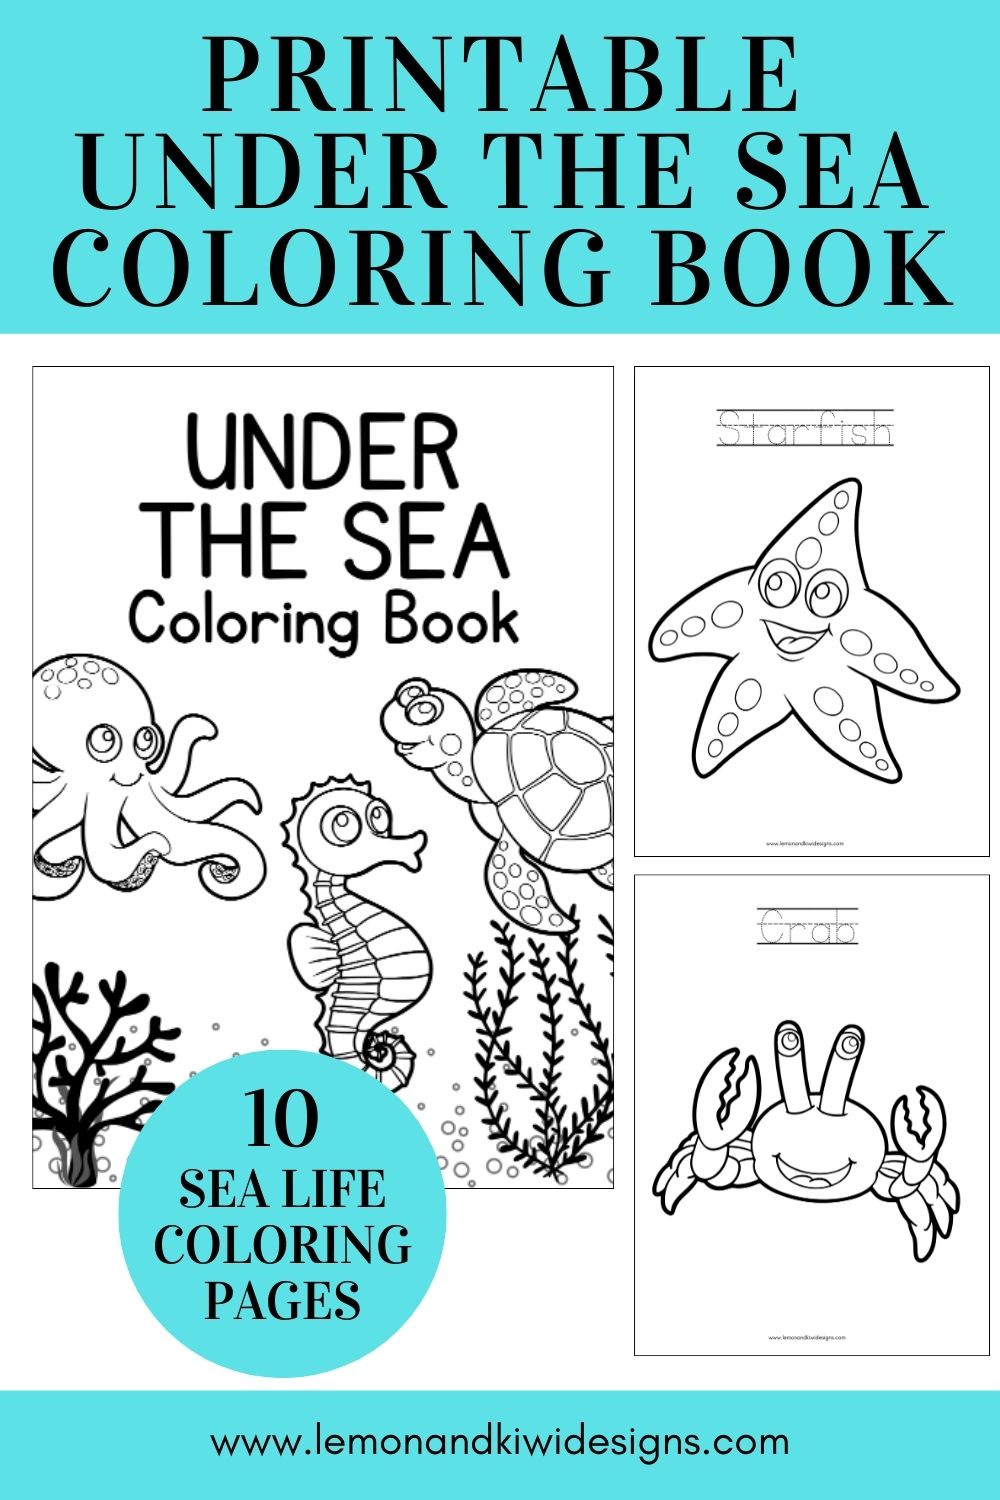 Printable Under the Sea Coloring Book (10 Ocean Coloring Pages)